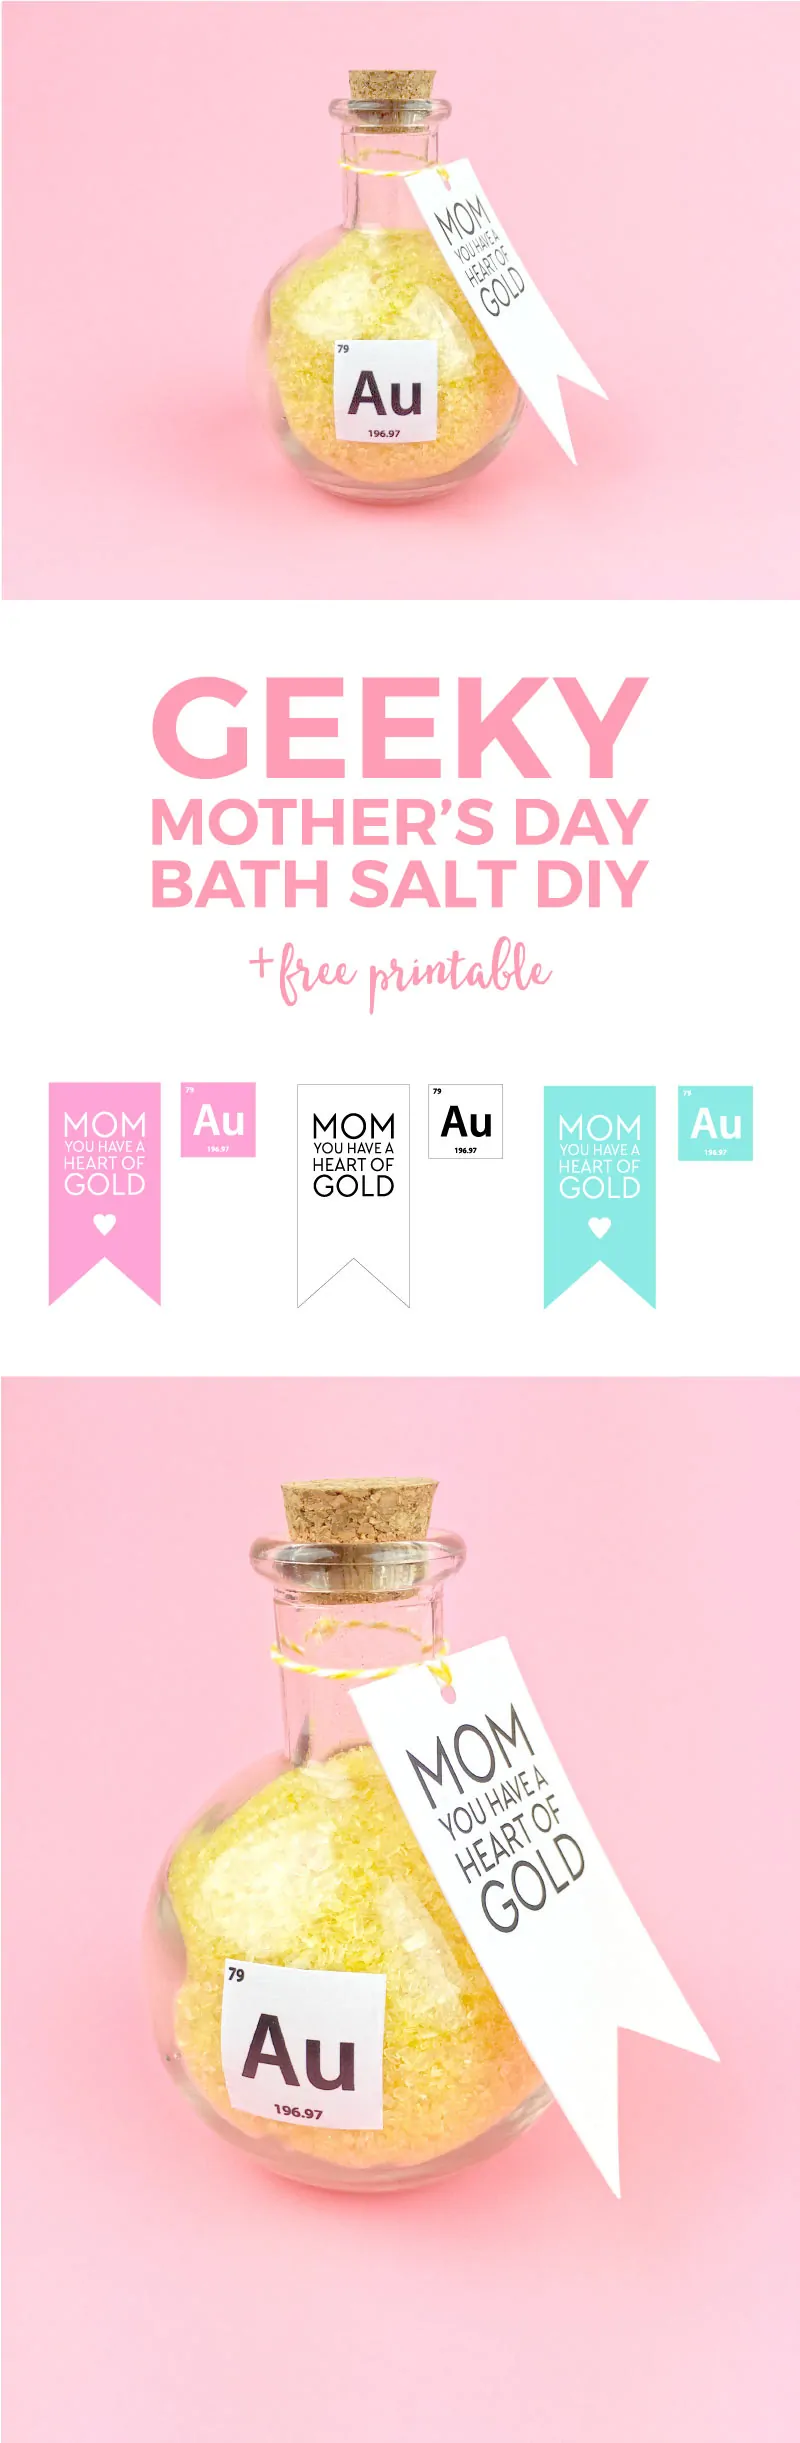 Come treat your mom to these luxurious gold flecked and lemon scented bath salts for Mothers Day. They're perfect for any tired mom and complete with free printable tags and stickers!!